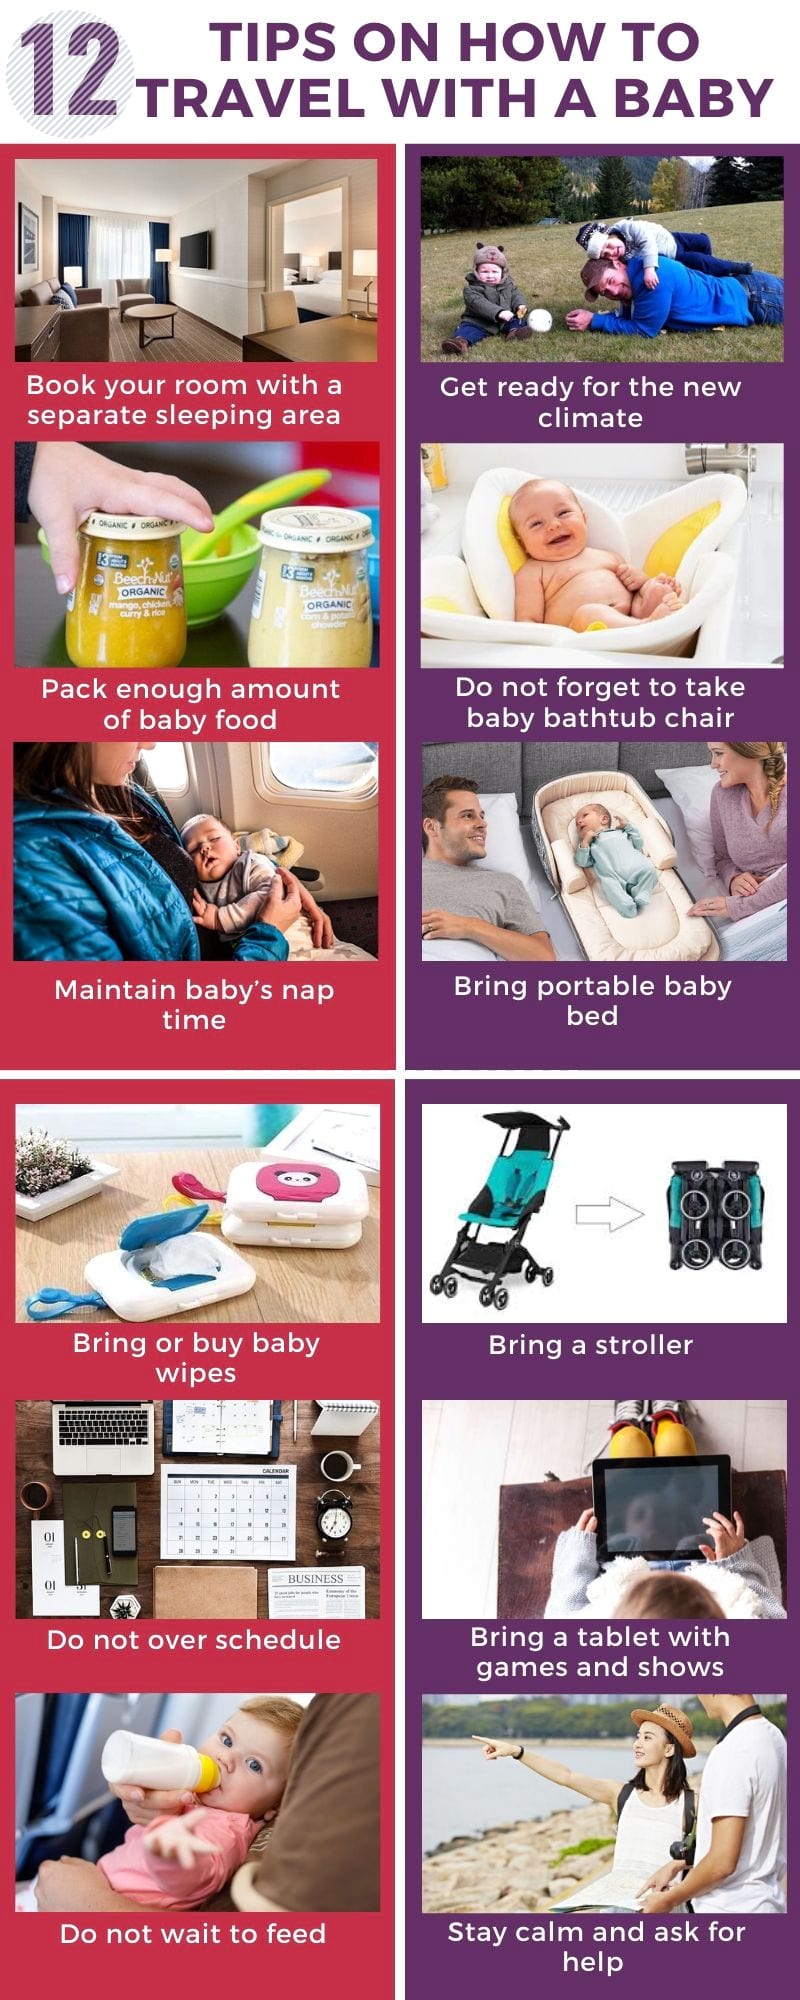 tips on how to travel with a baby